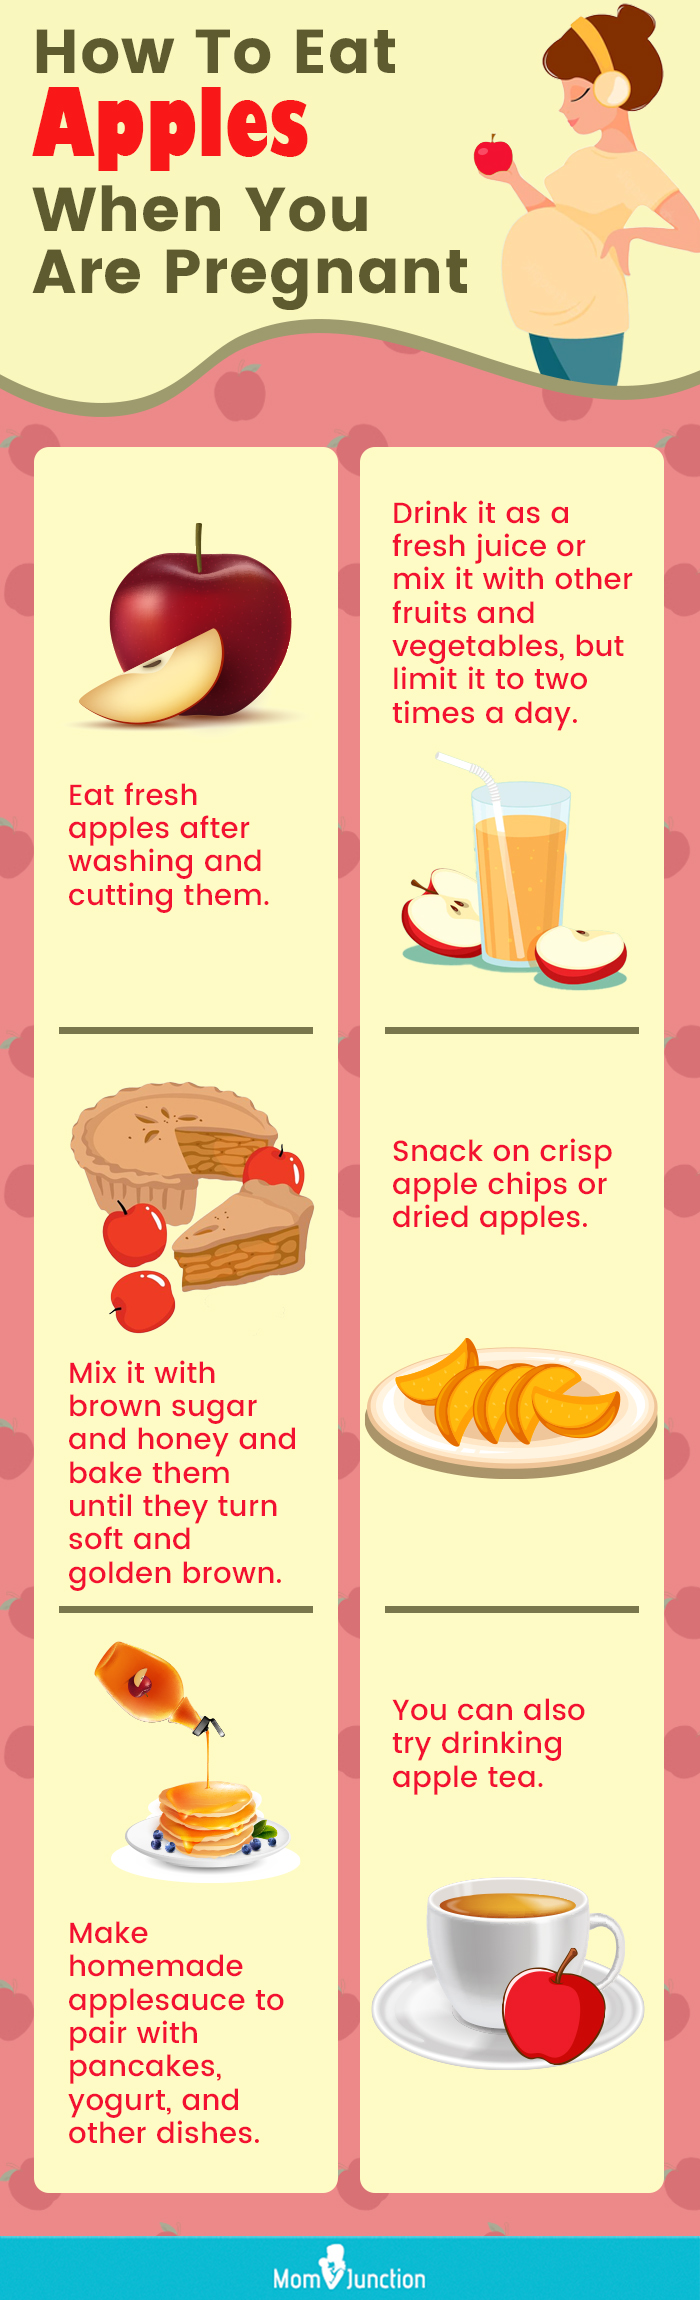 https://www.momjunction.com/wp-content/uploads/2023/01/How-To-Eat-Apples-When-You-Are-Pregnant.jpg